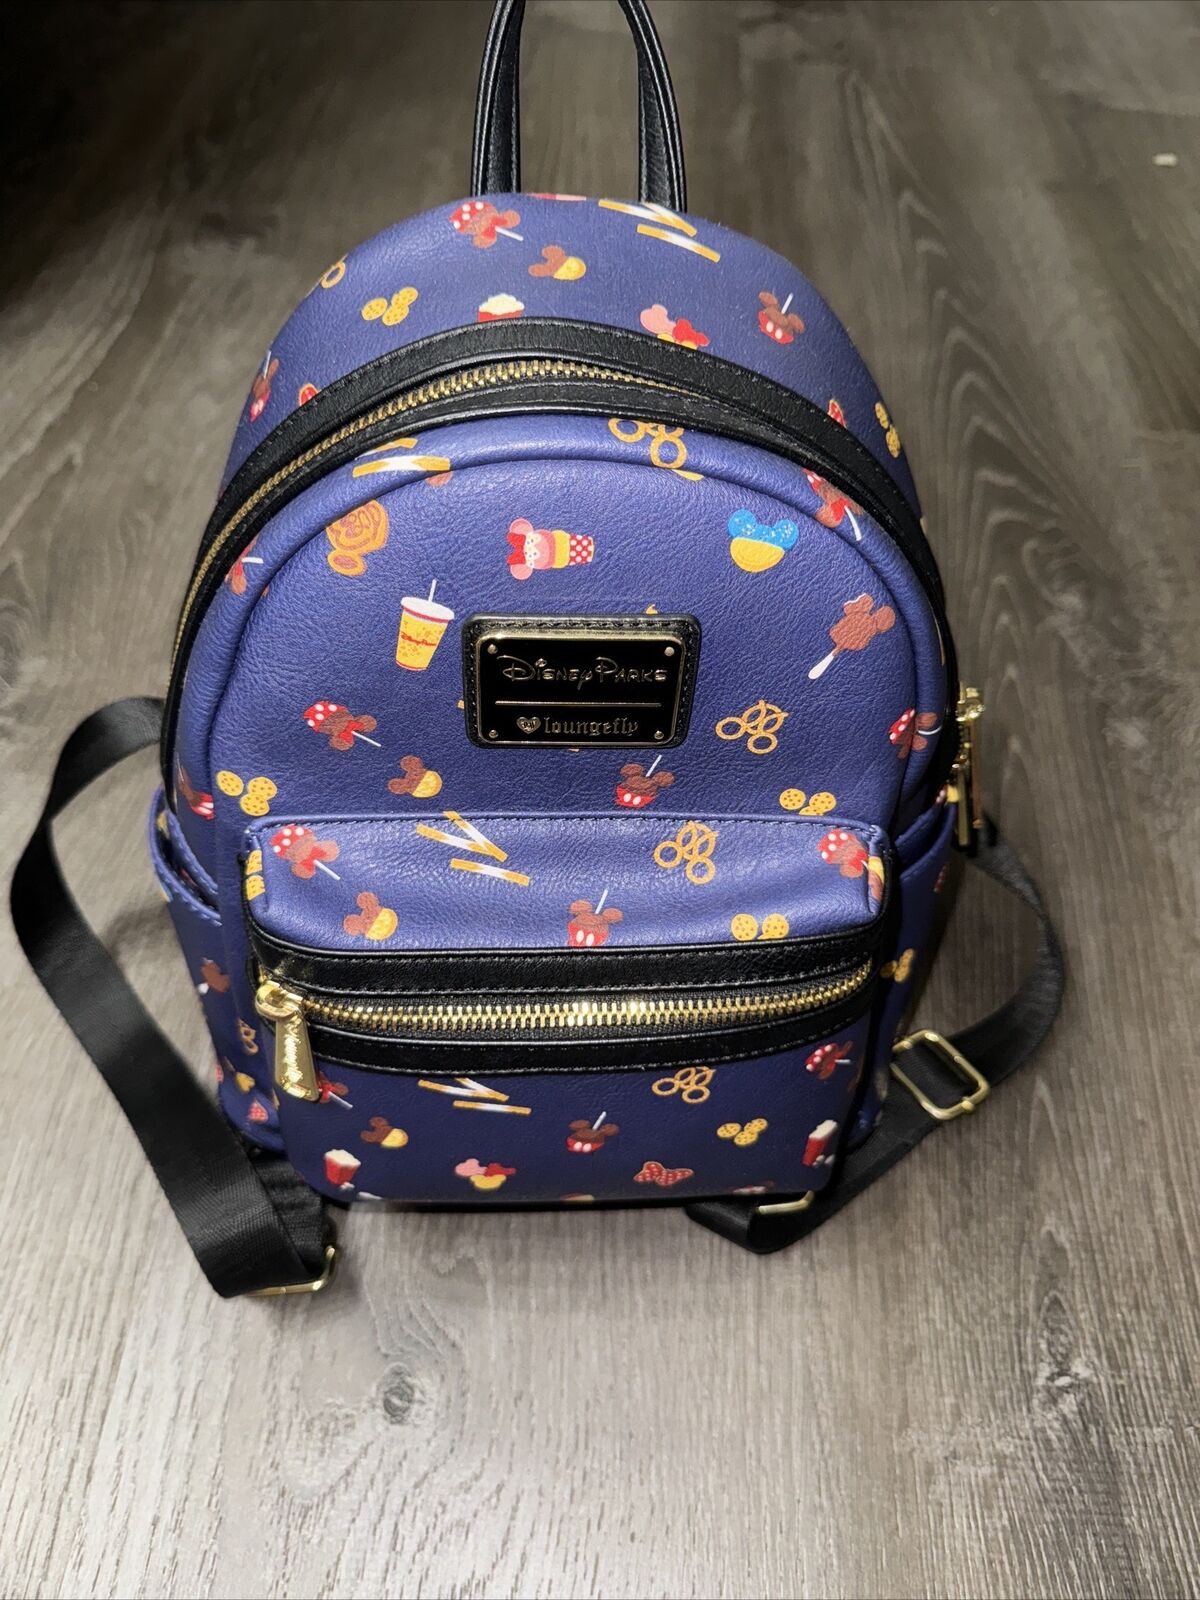 LOUNGEFLY x DISNEY PARKS limited release Disney Snacks mini backpack in navy